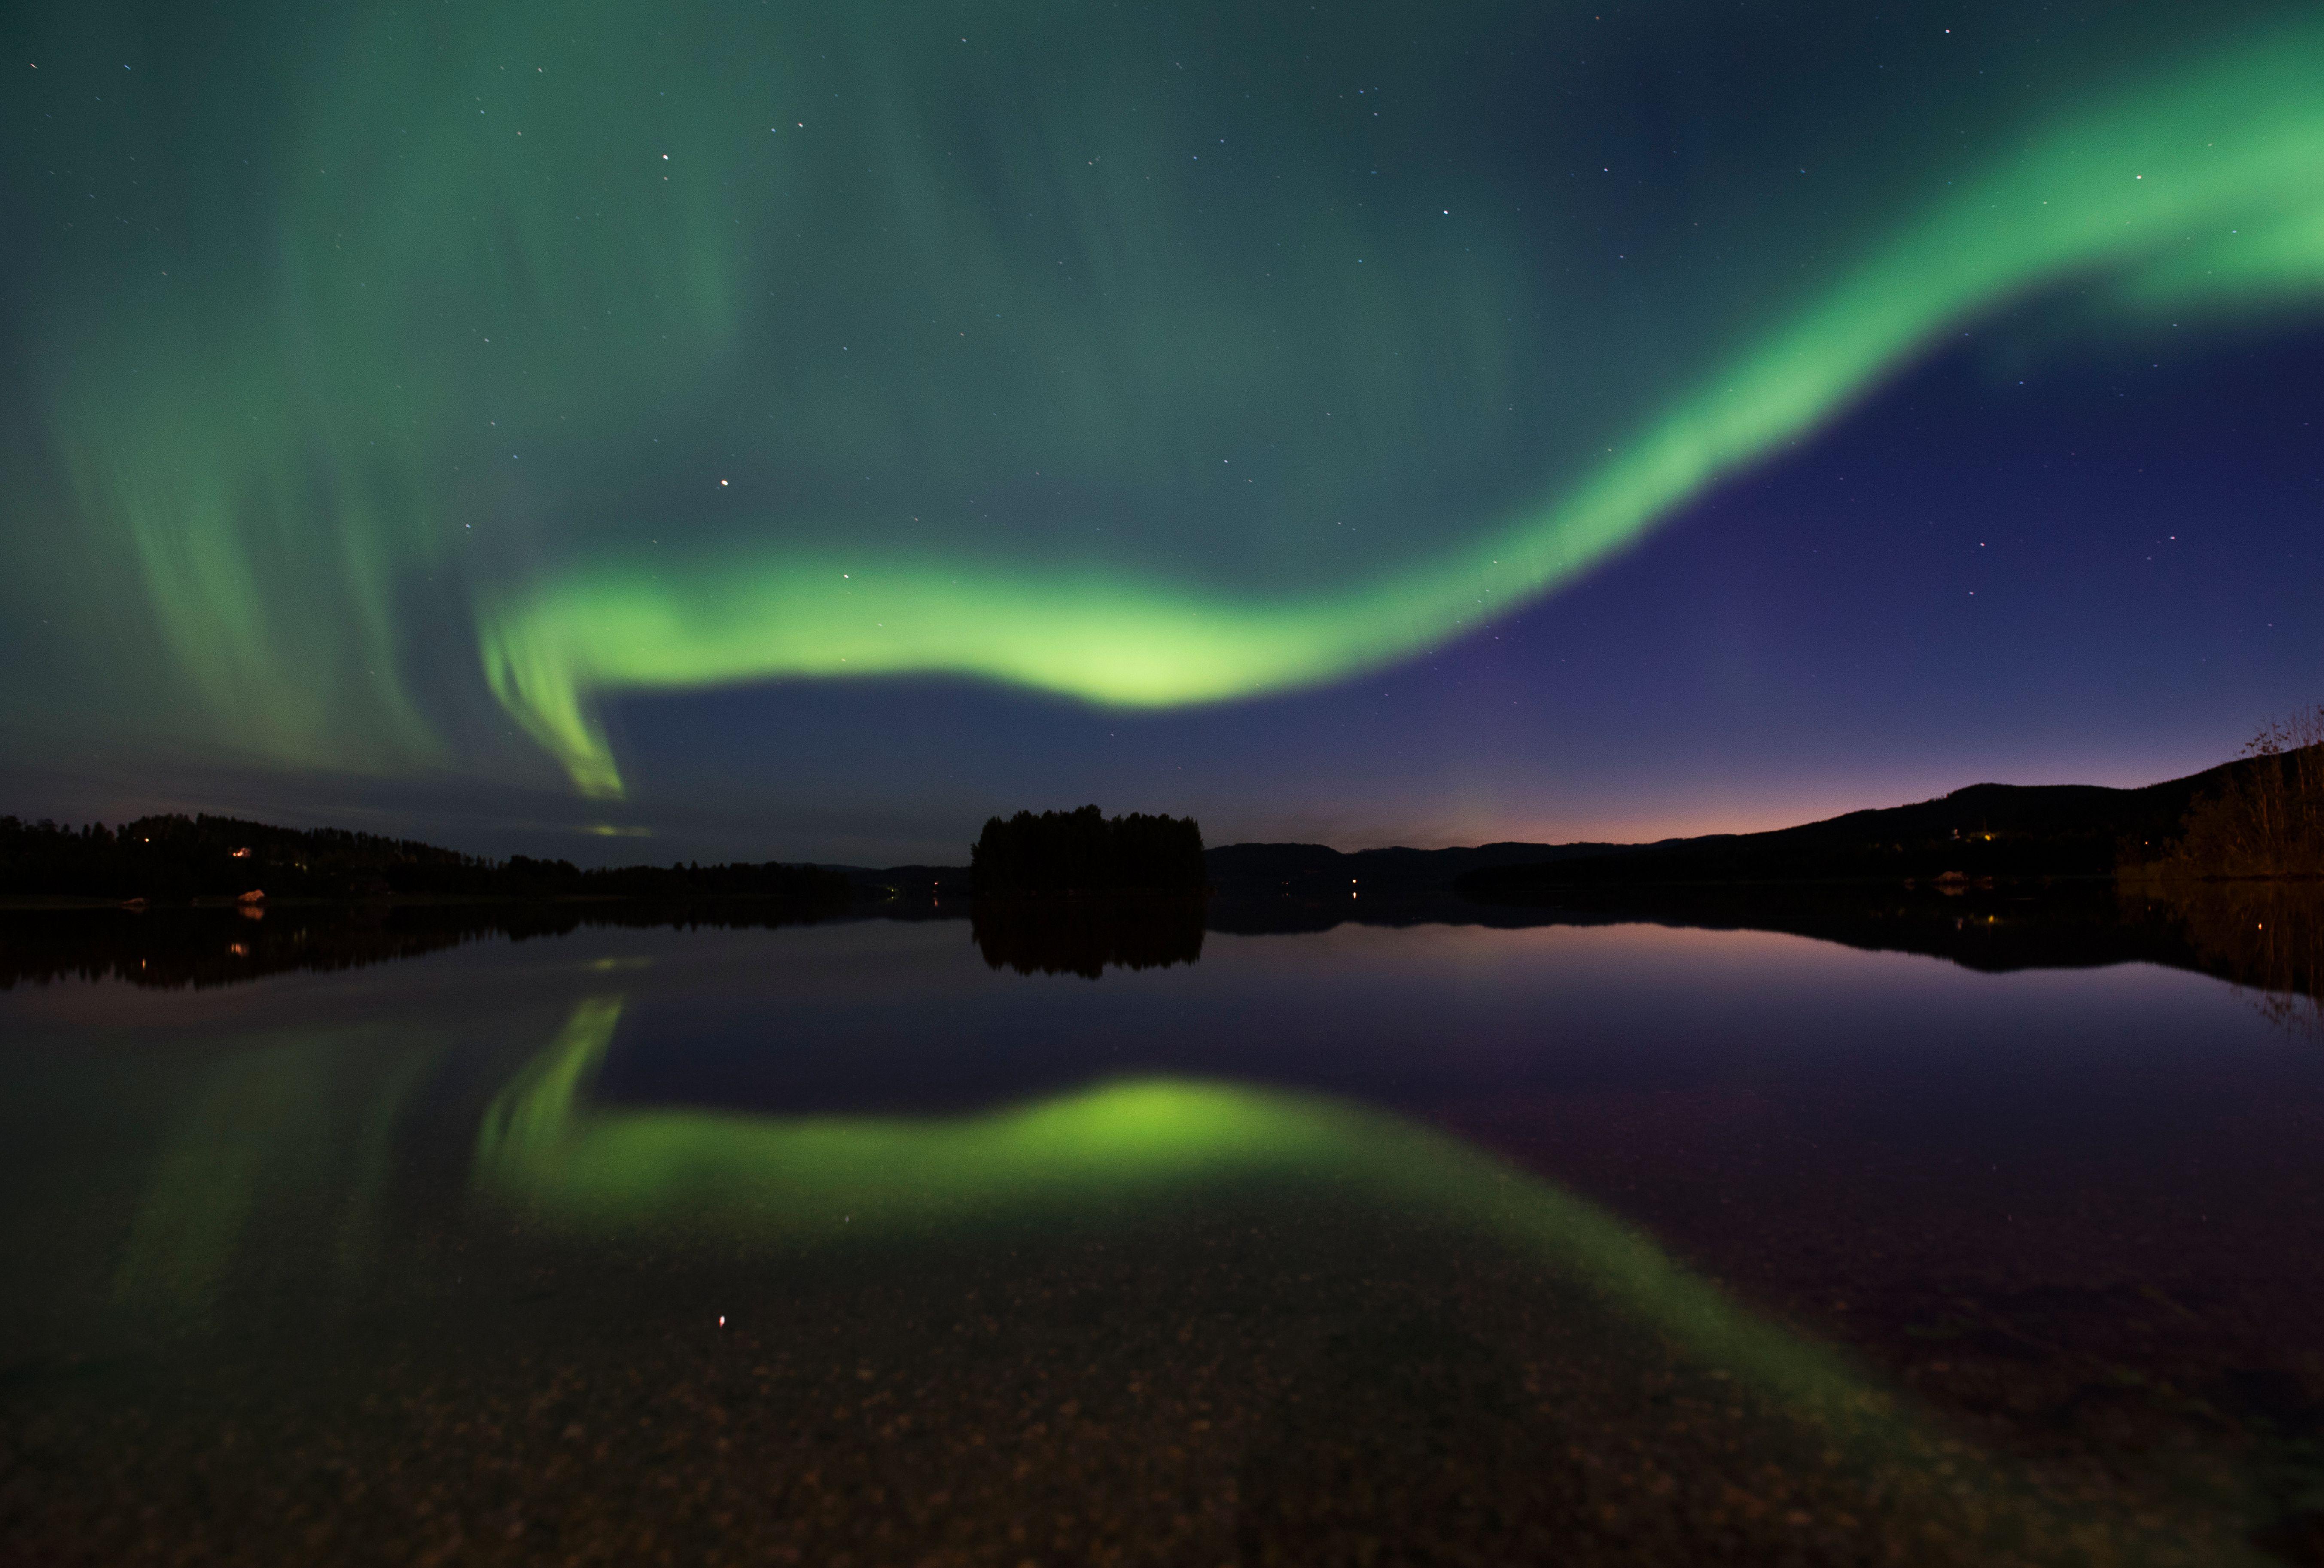 Northern lights Seattle, Pacific Northwest could get rare glimpse of